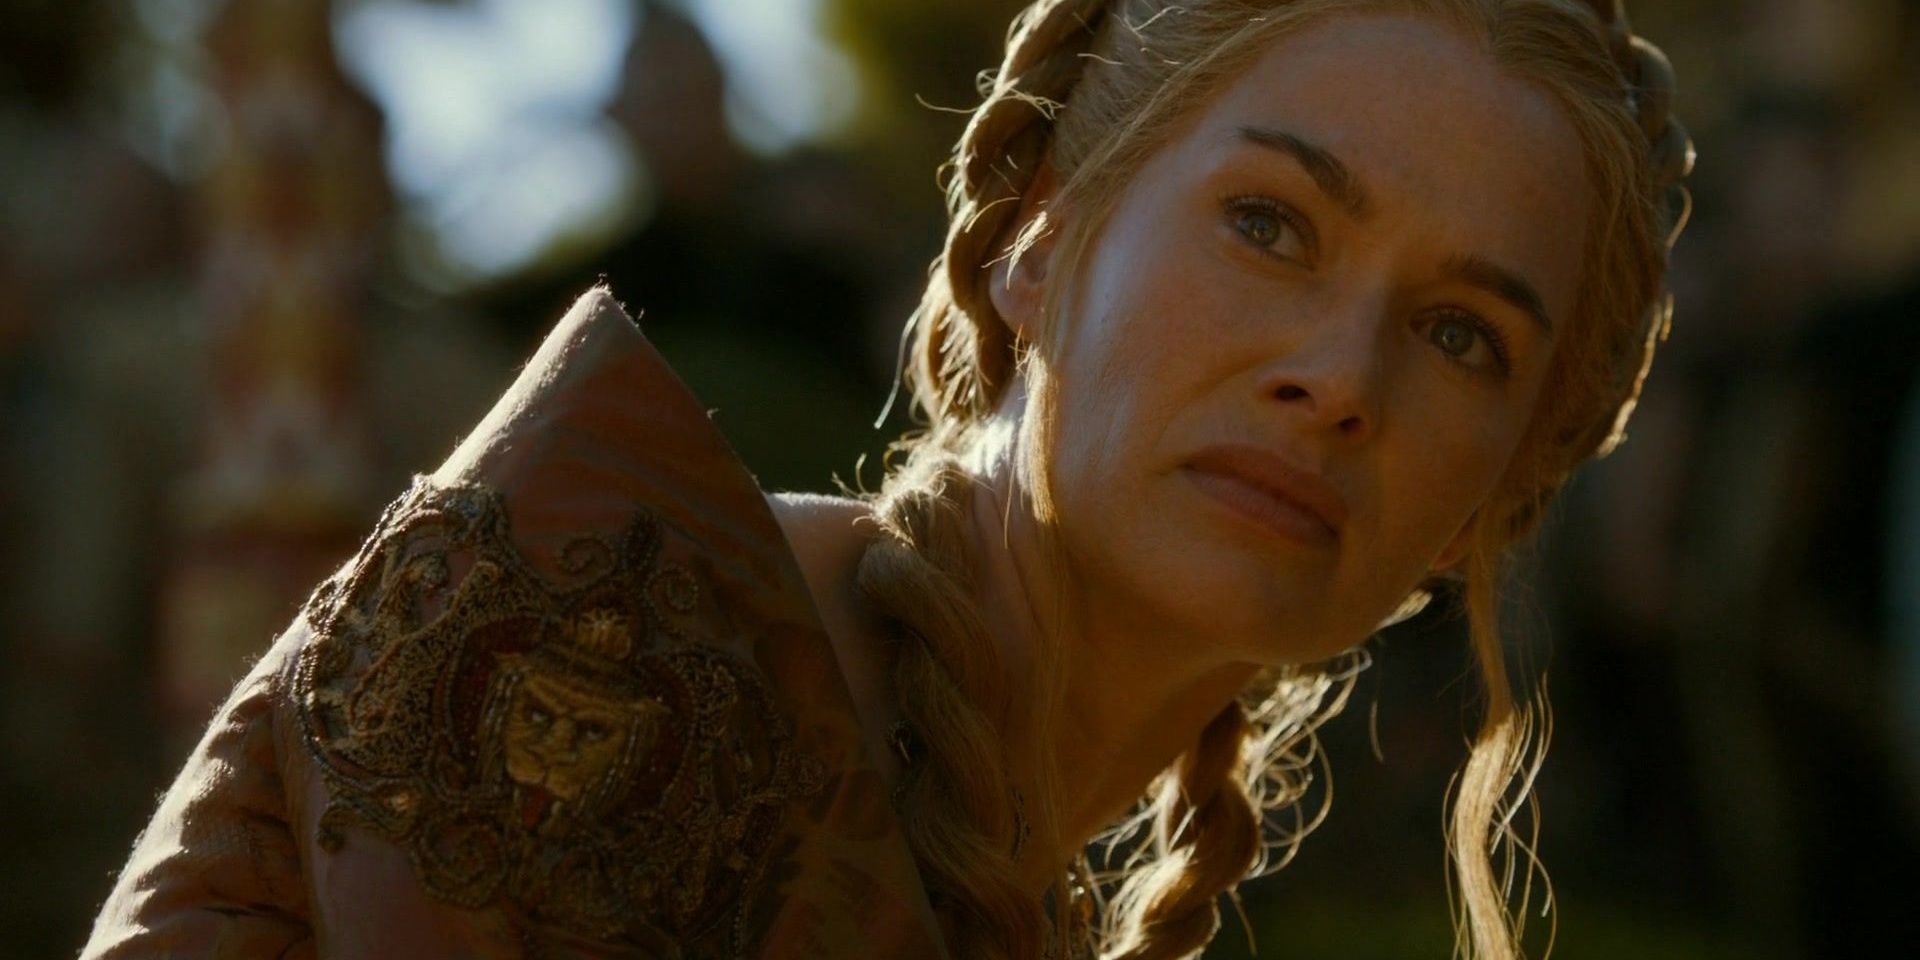 Lena Headey as Cersei Lannister in Game of Thrones season 4 episode 2 The Lion and the Rose